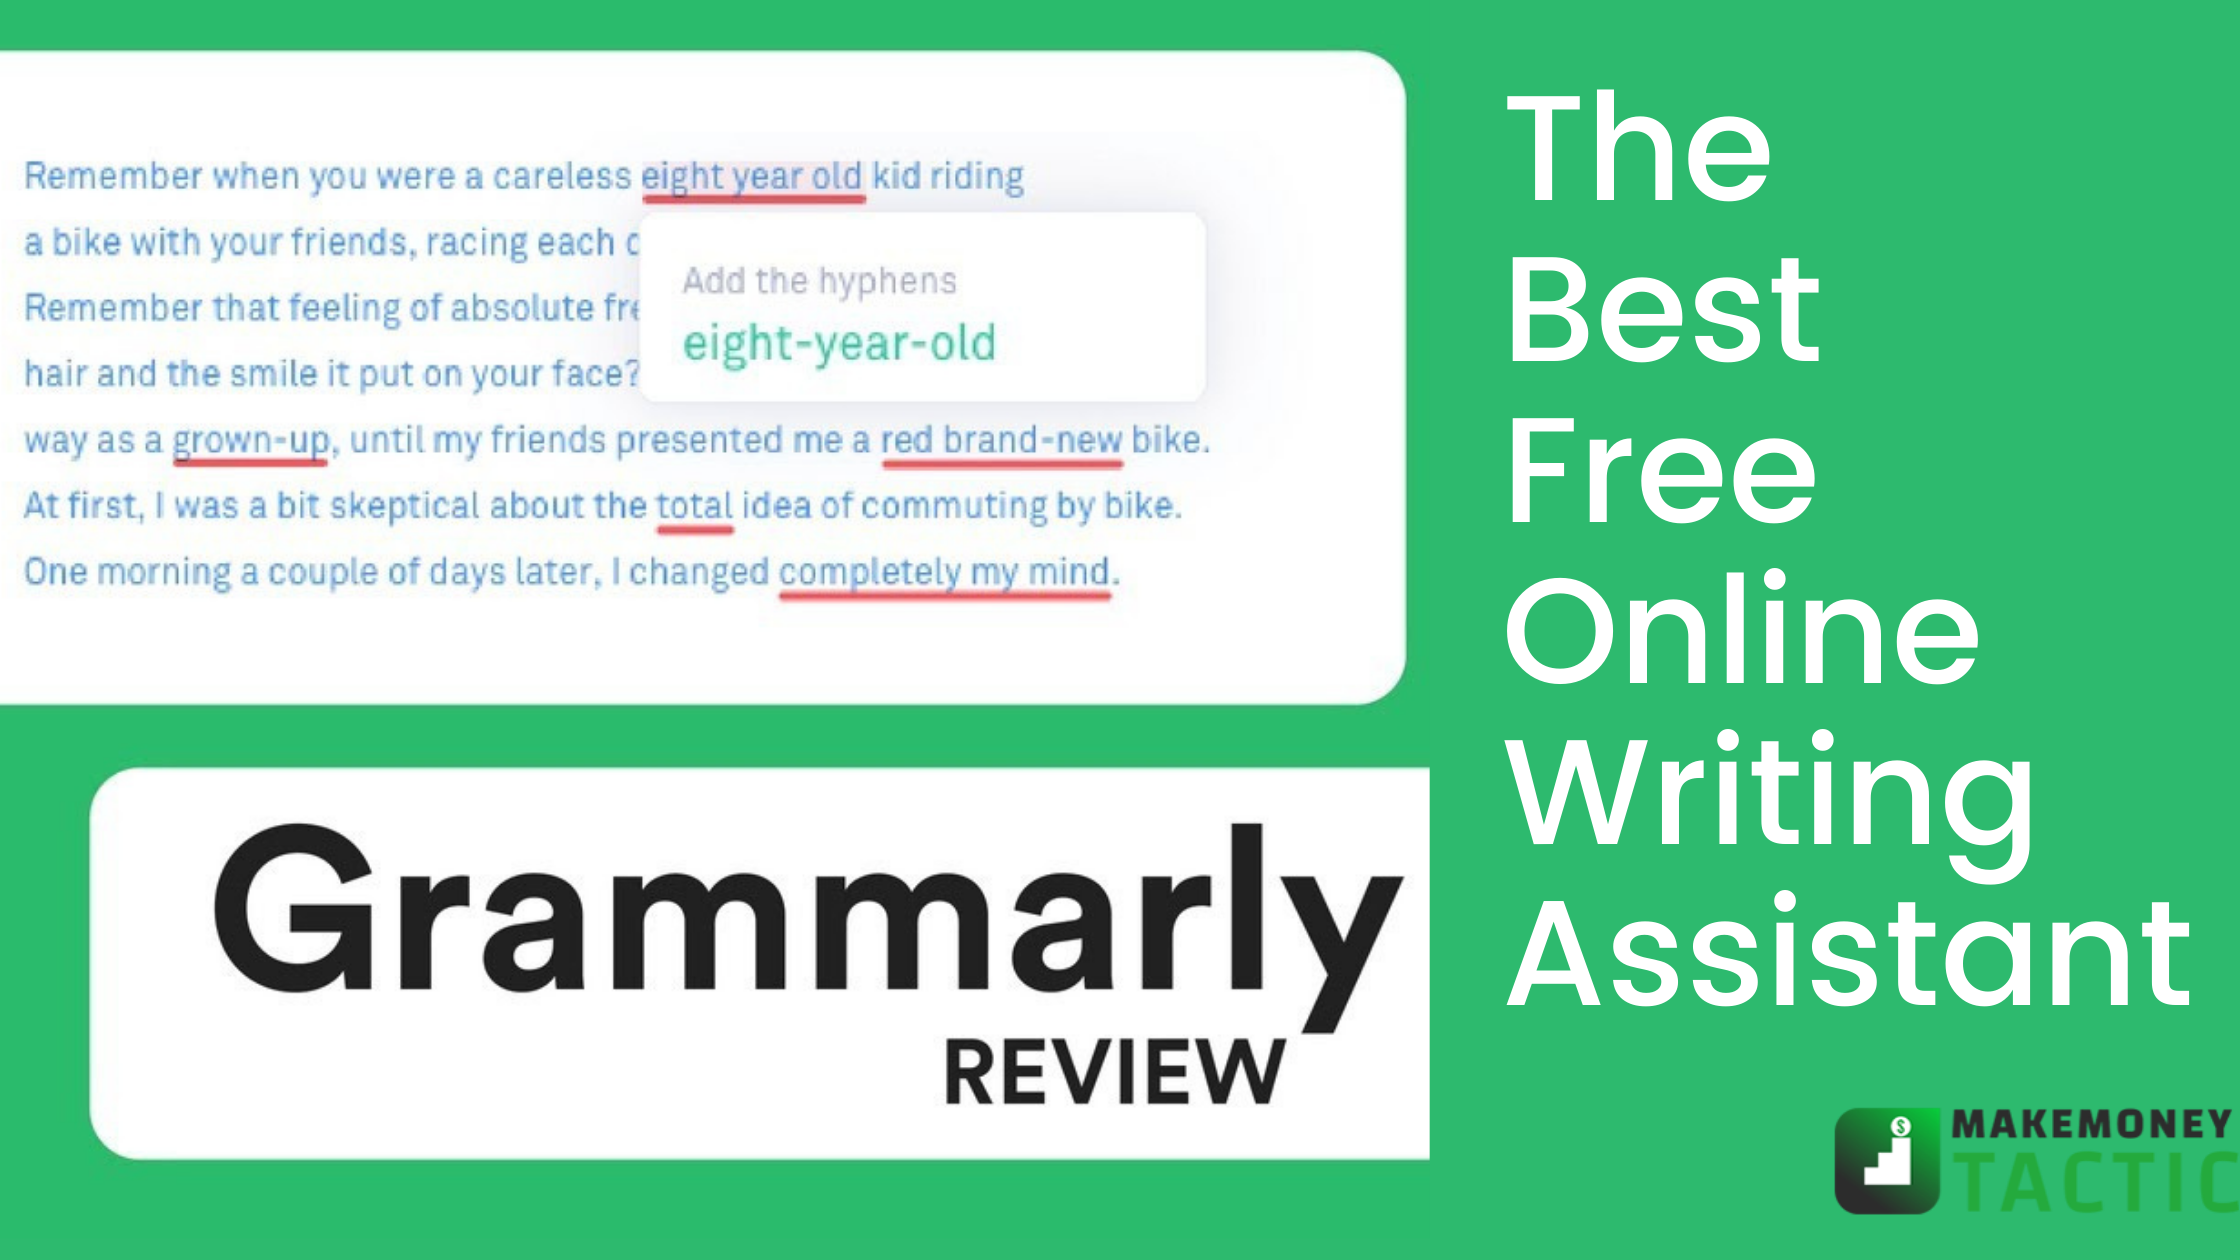 Grammarly review: Free Online Writing Assistant for students